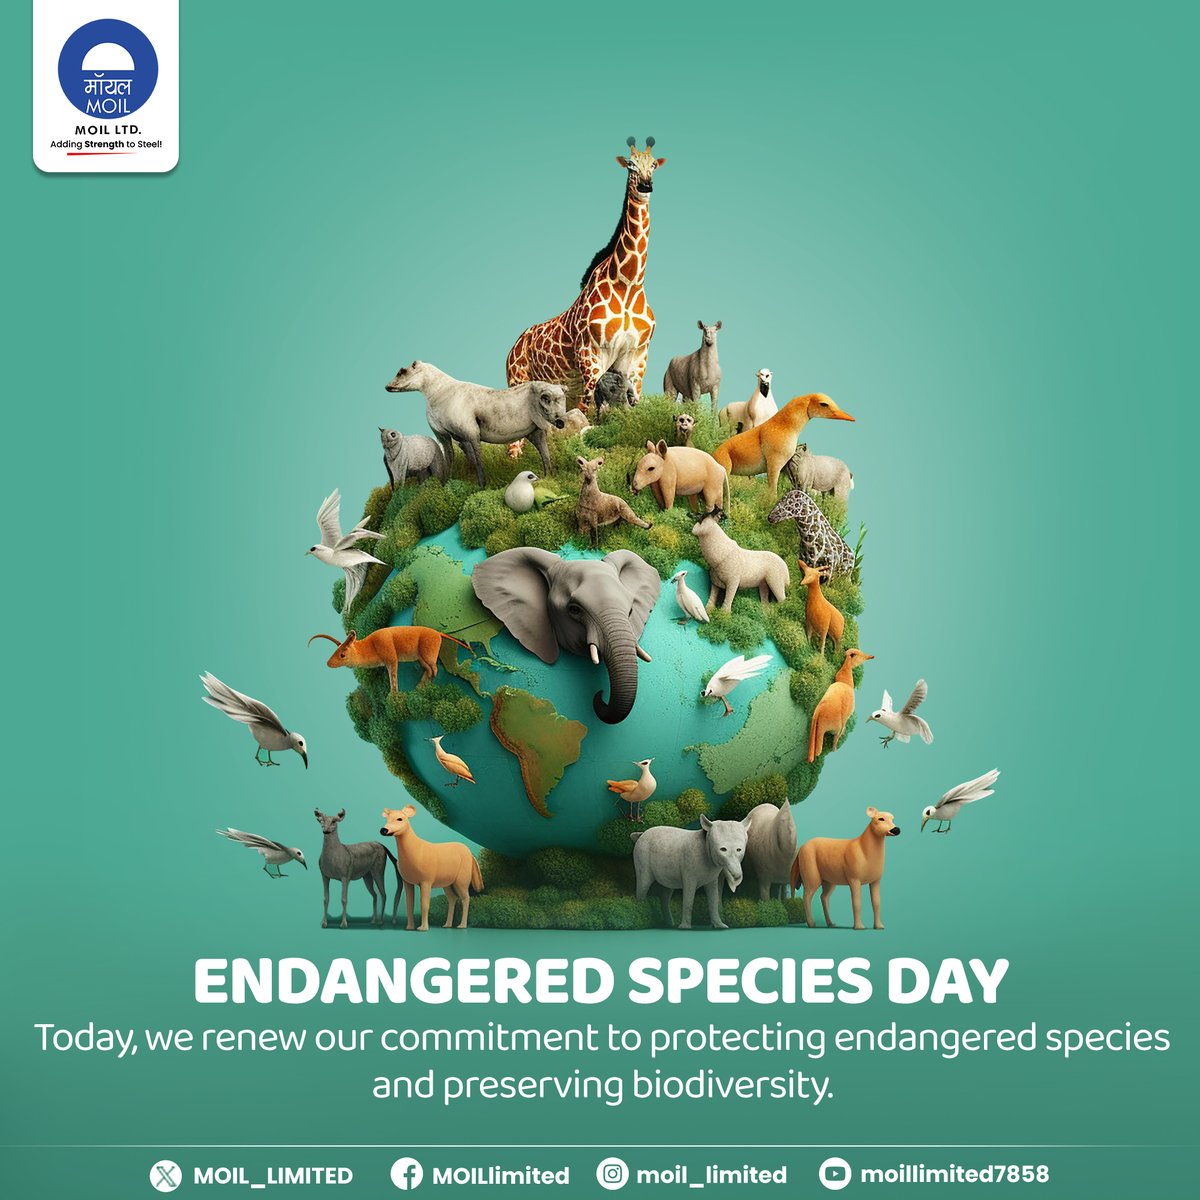 Our planet's diversity is its strength. On Endangered Species Day, we commit to safeguarding the future of every living treasure. #EndangeredSpeciesDay #MOIL #HarEkKaamDeshKeNaam